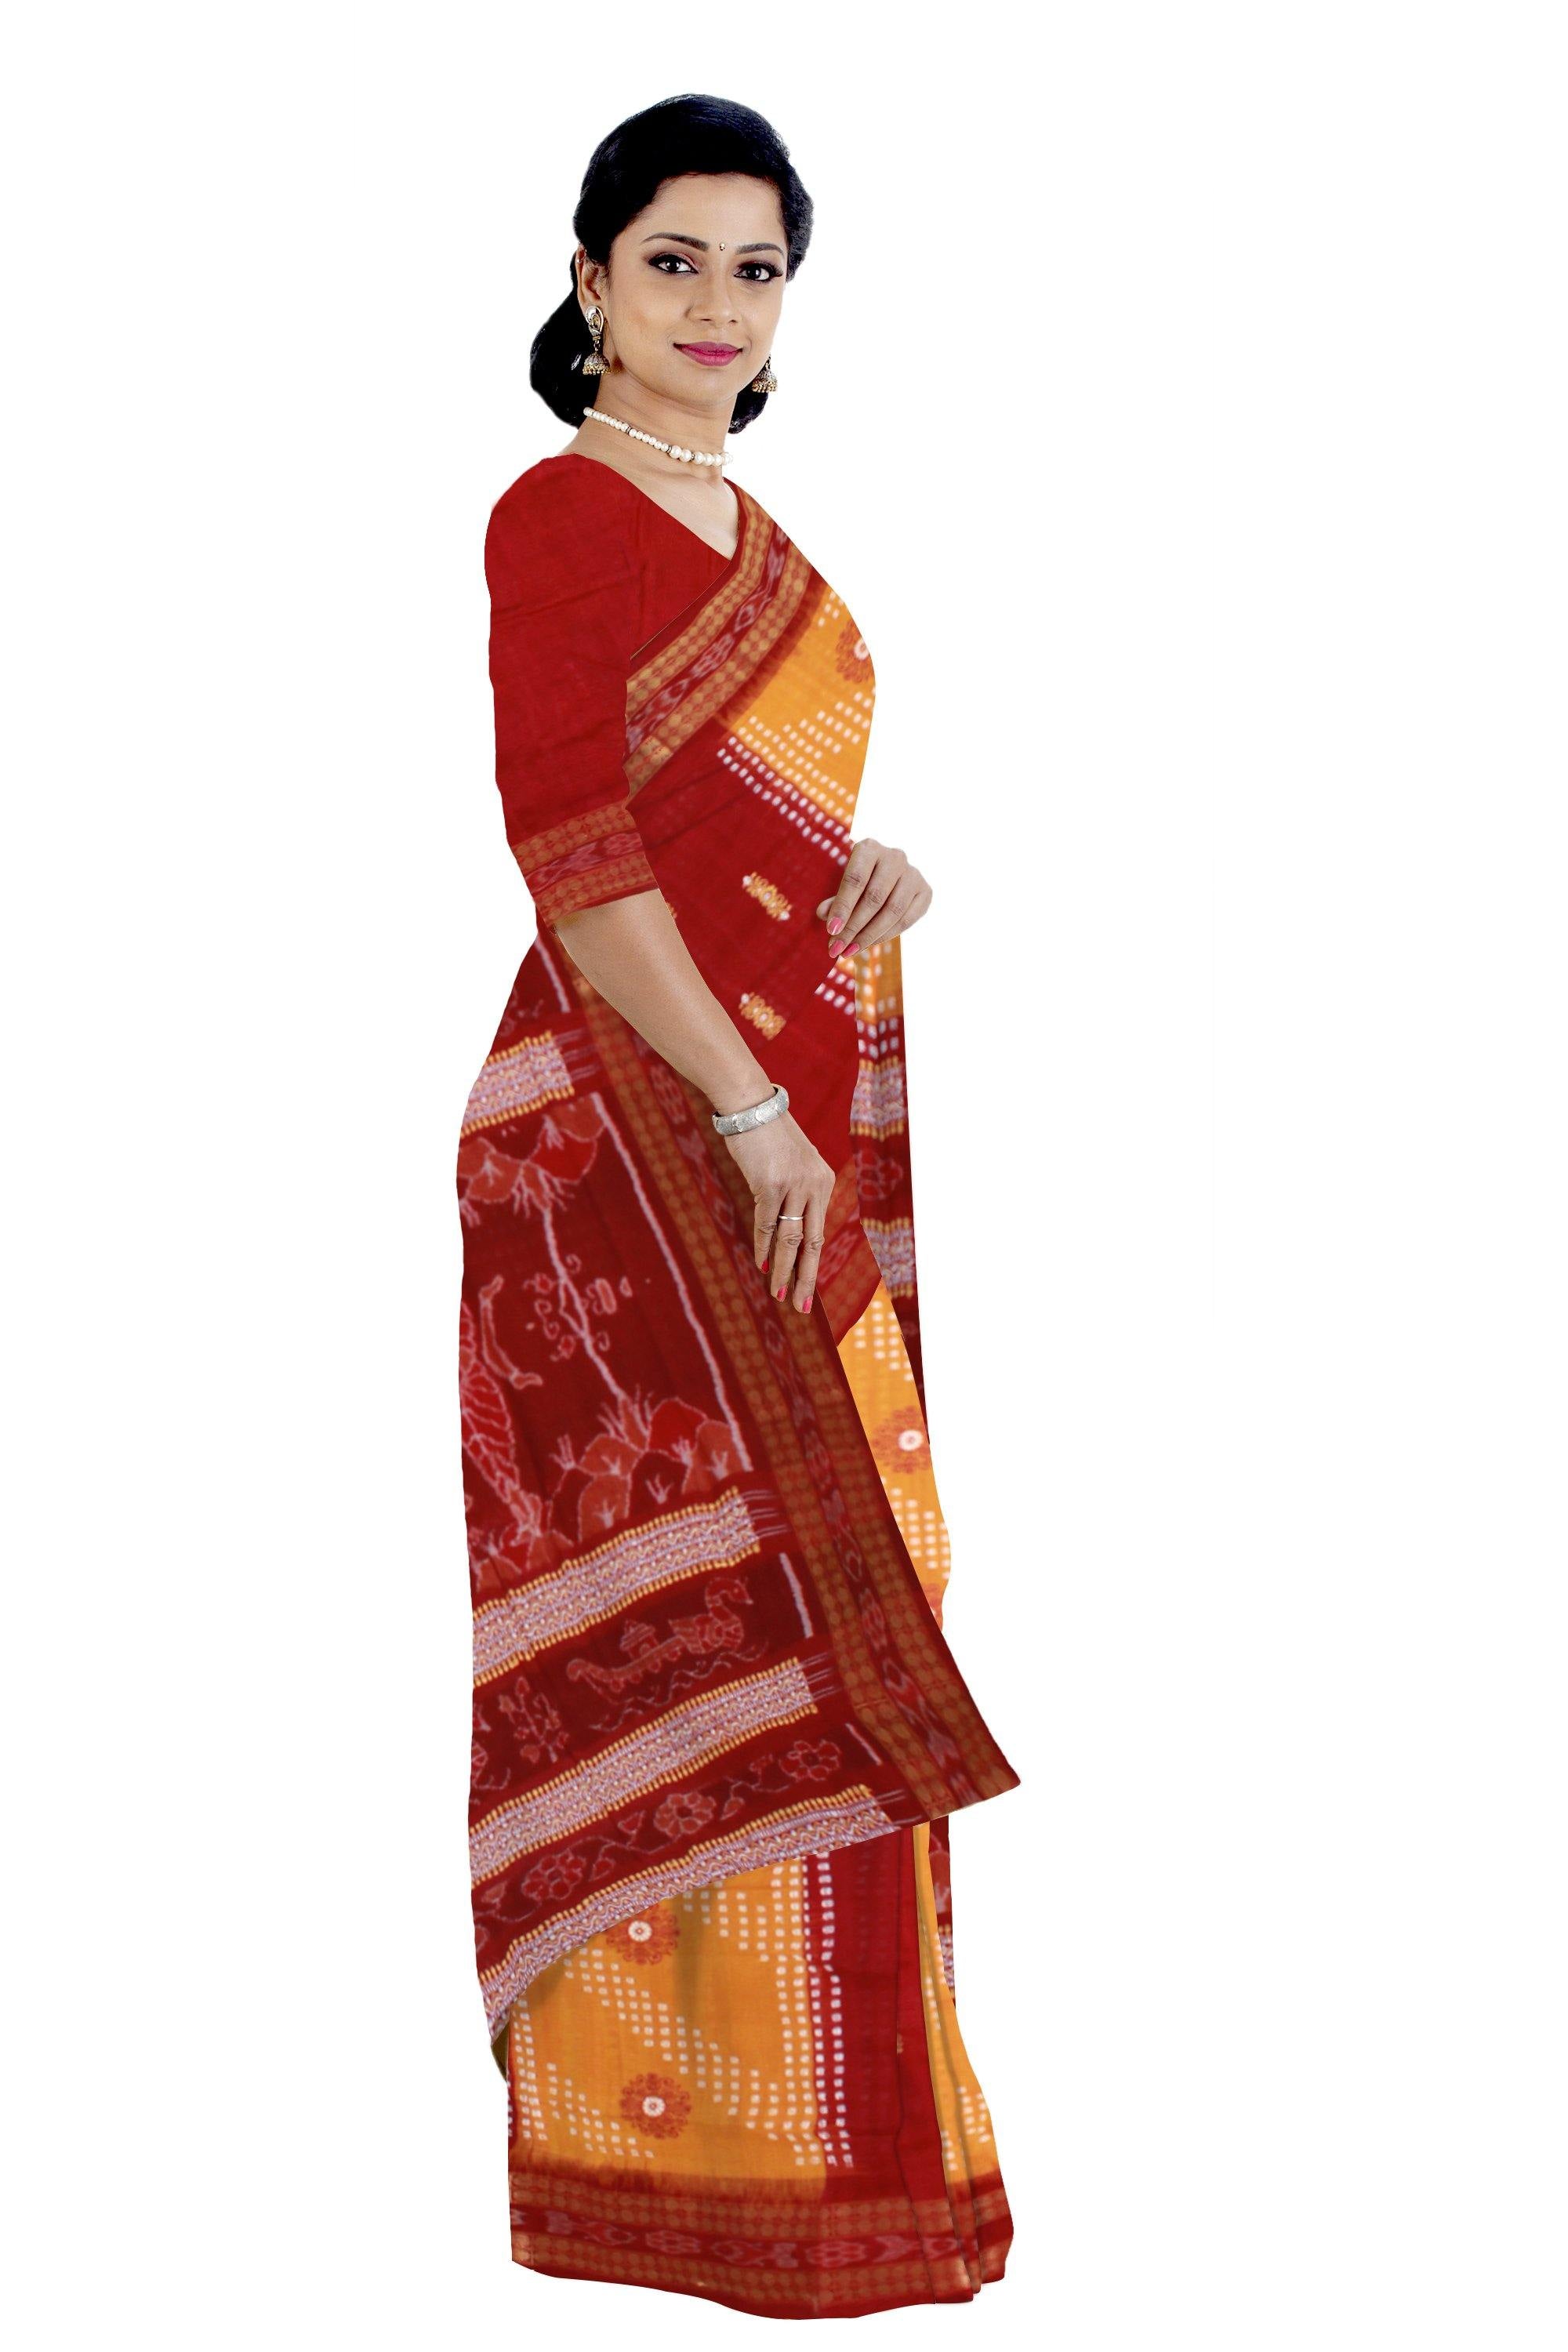 Sambalpuri traditional Bomkei saree in brown and yellow color in body and brown in pallu, with blouse piece - Koshali Arts & Crafts Enterprise